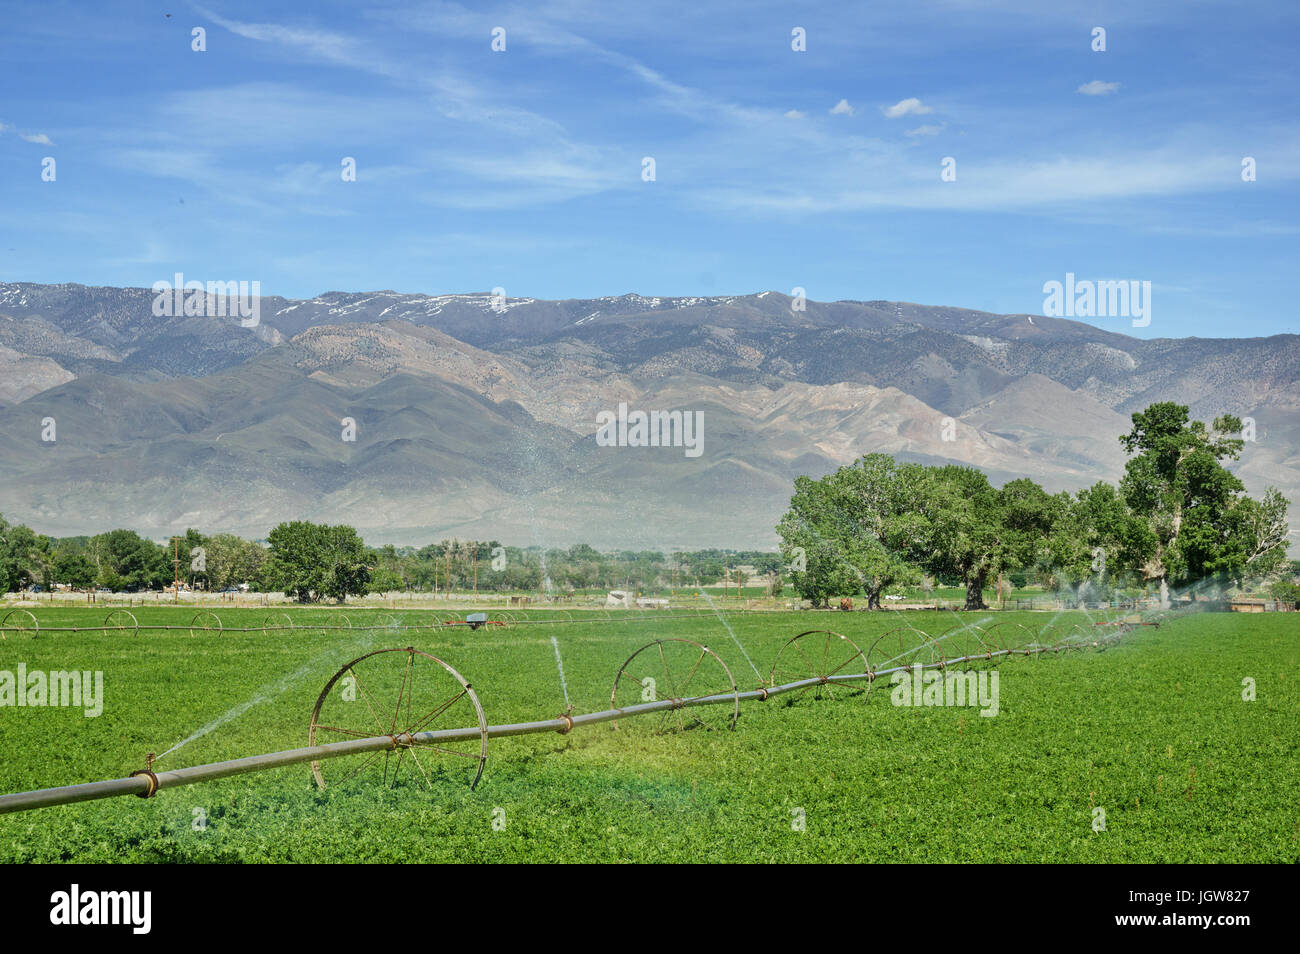 wheel line irrigation system watering an alfalfa field in the Owens Valley Stock Photo